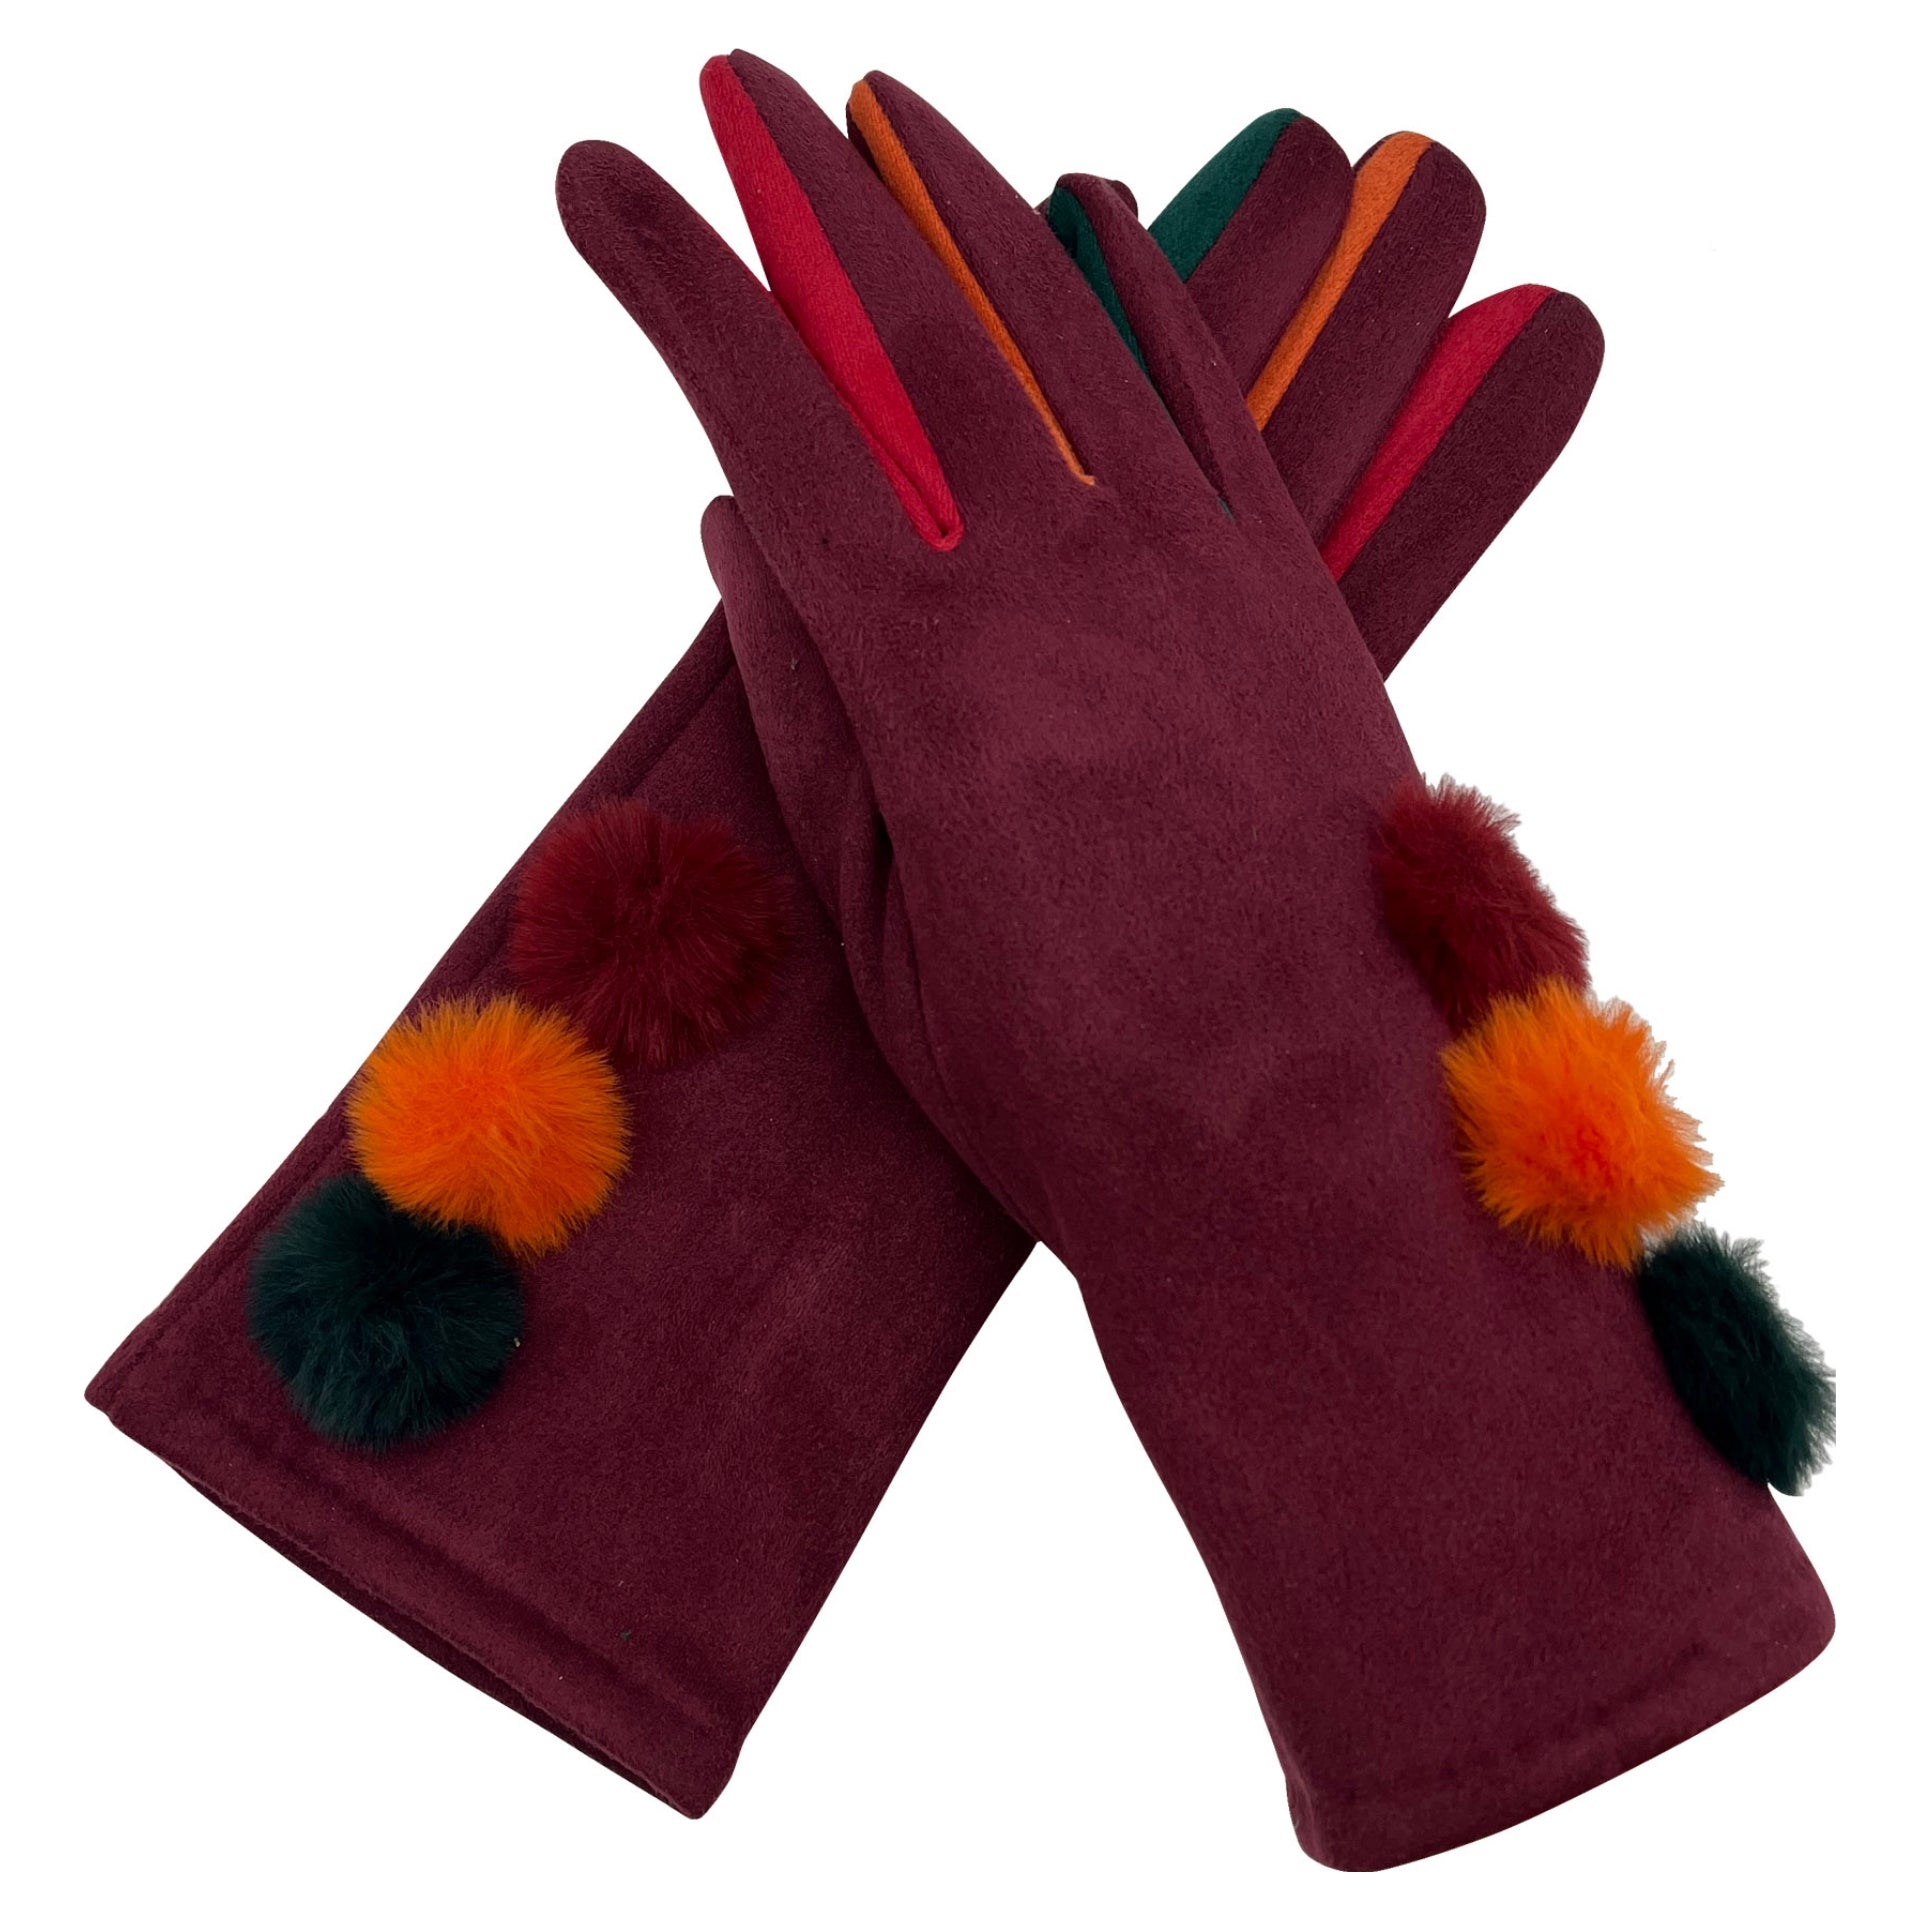 Ladies Soft Synthetic Leather Gloves Walking Driving Winter Warm Fur Lined maroon